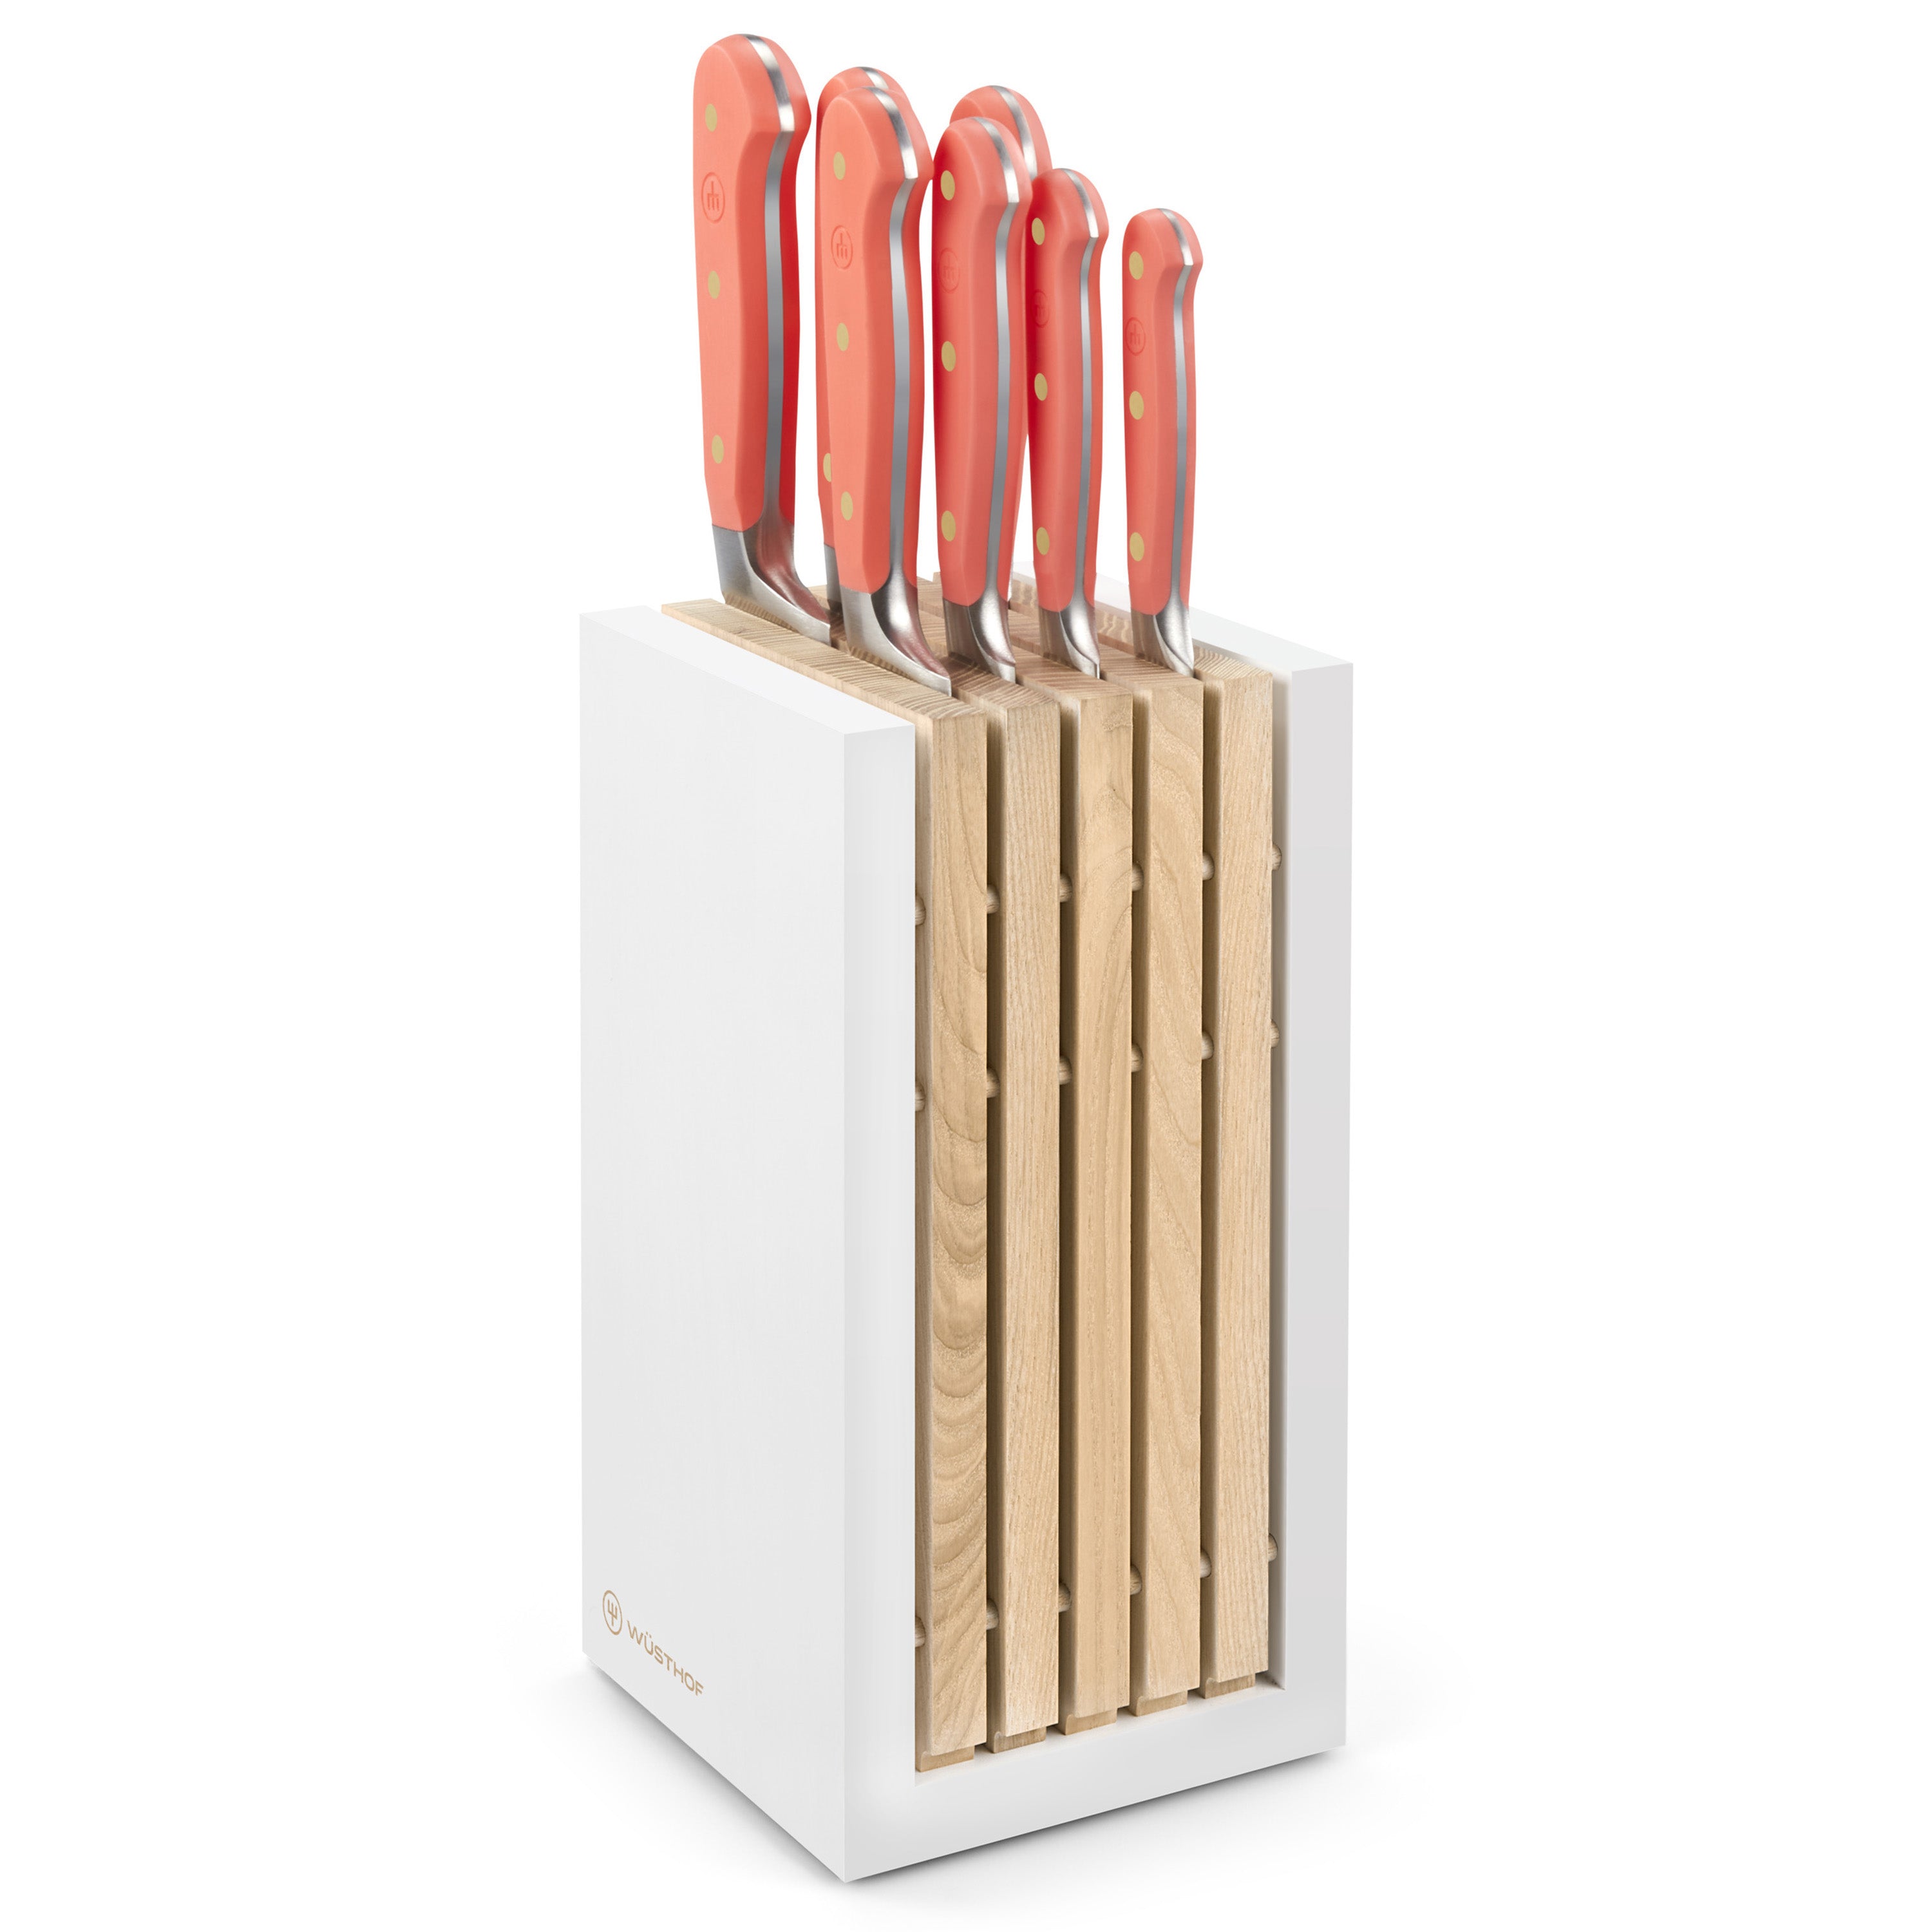 5Pc Knife Block Set, Stainless Steel, Pink